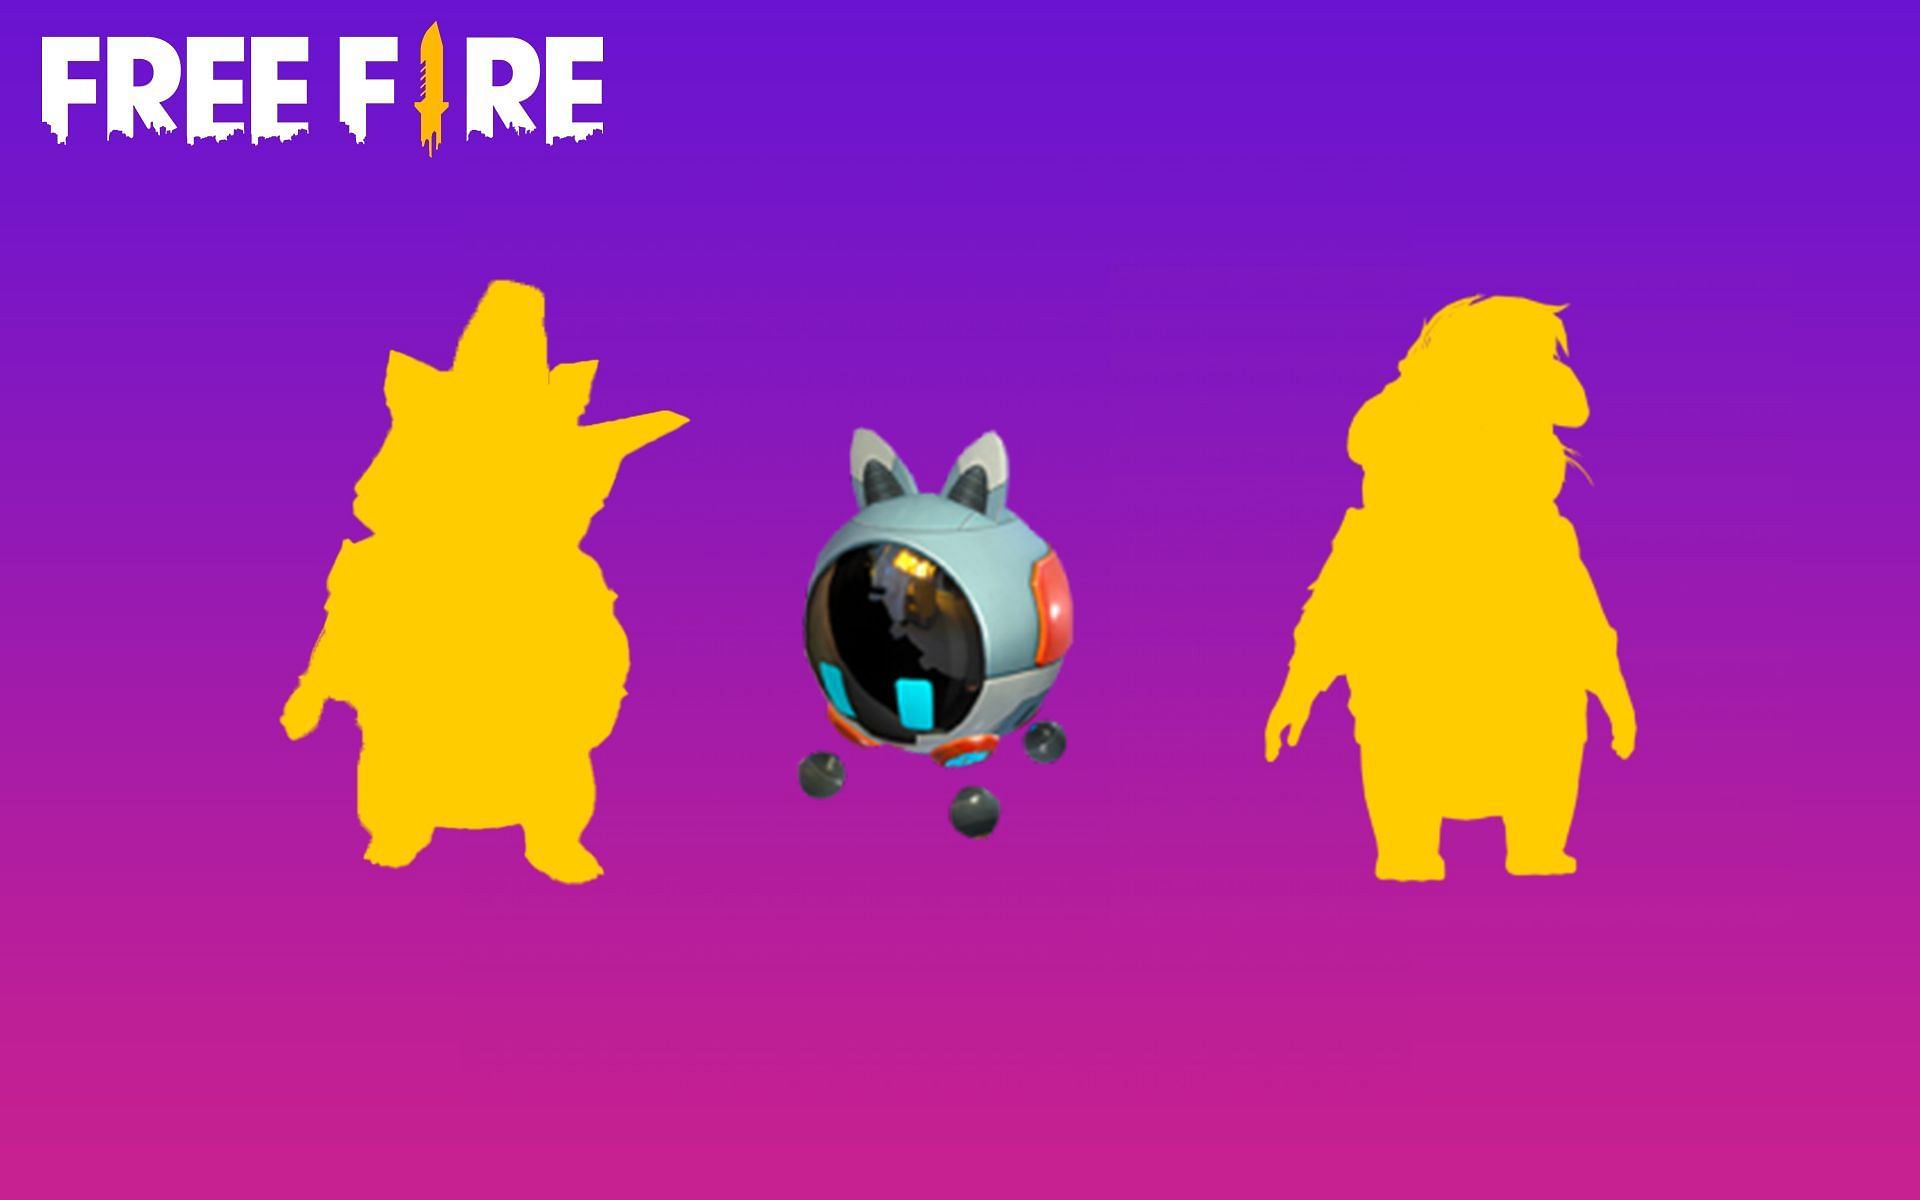 These are the best pets for healing and utility in Free Fire (Image via Sportskeeda)